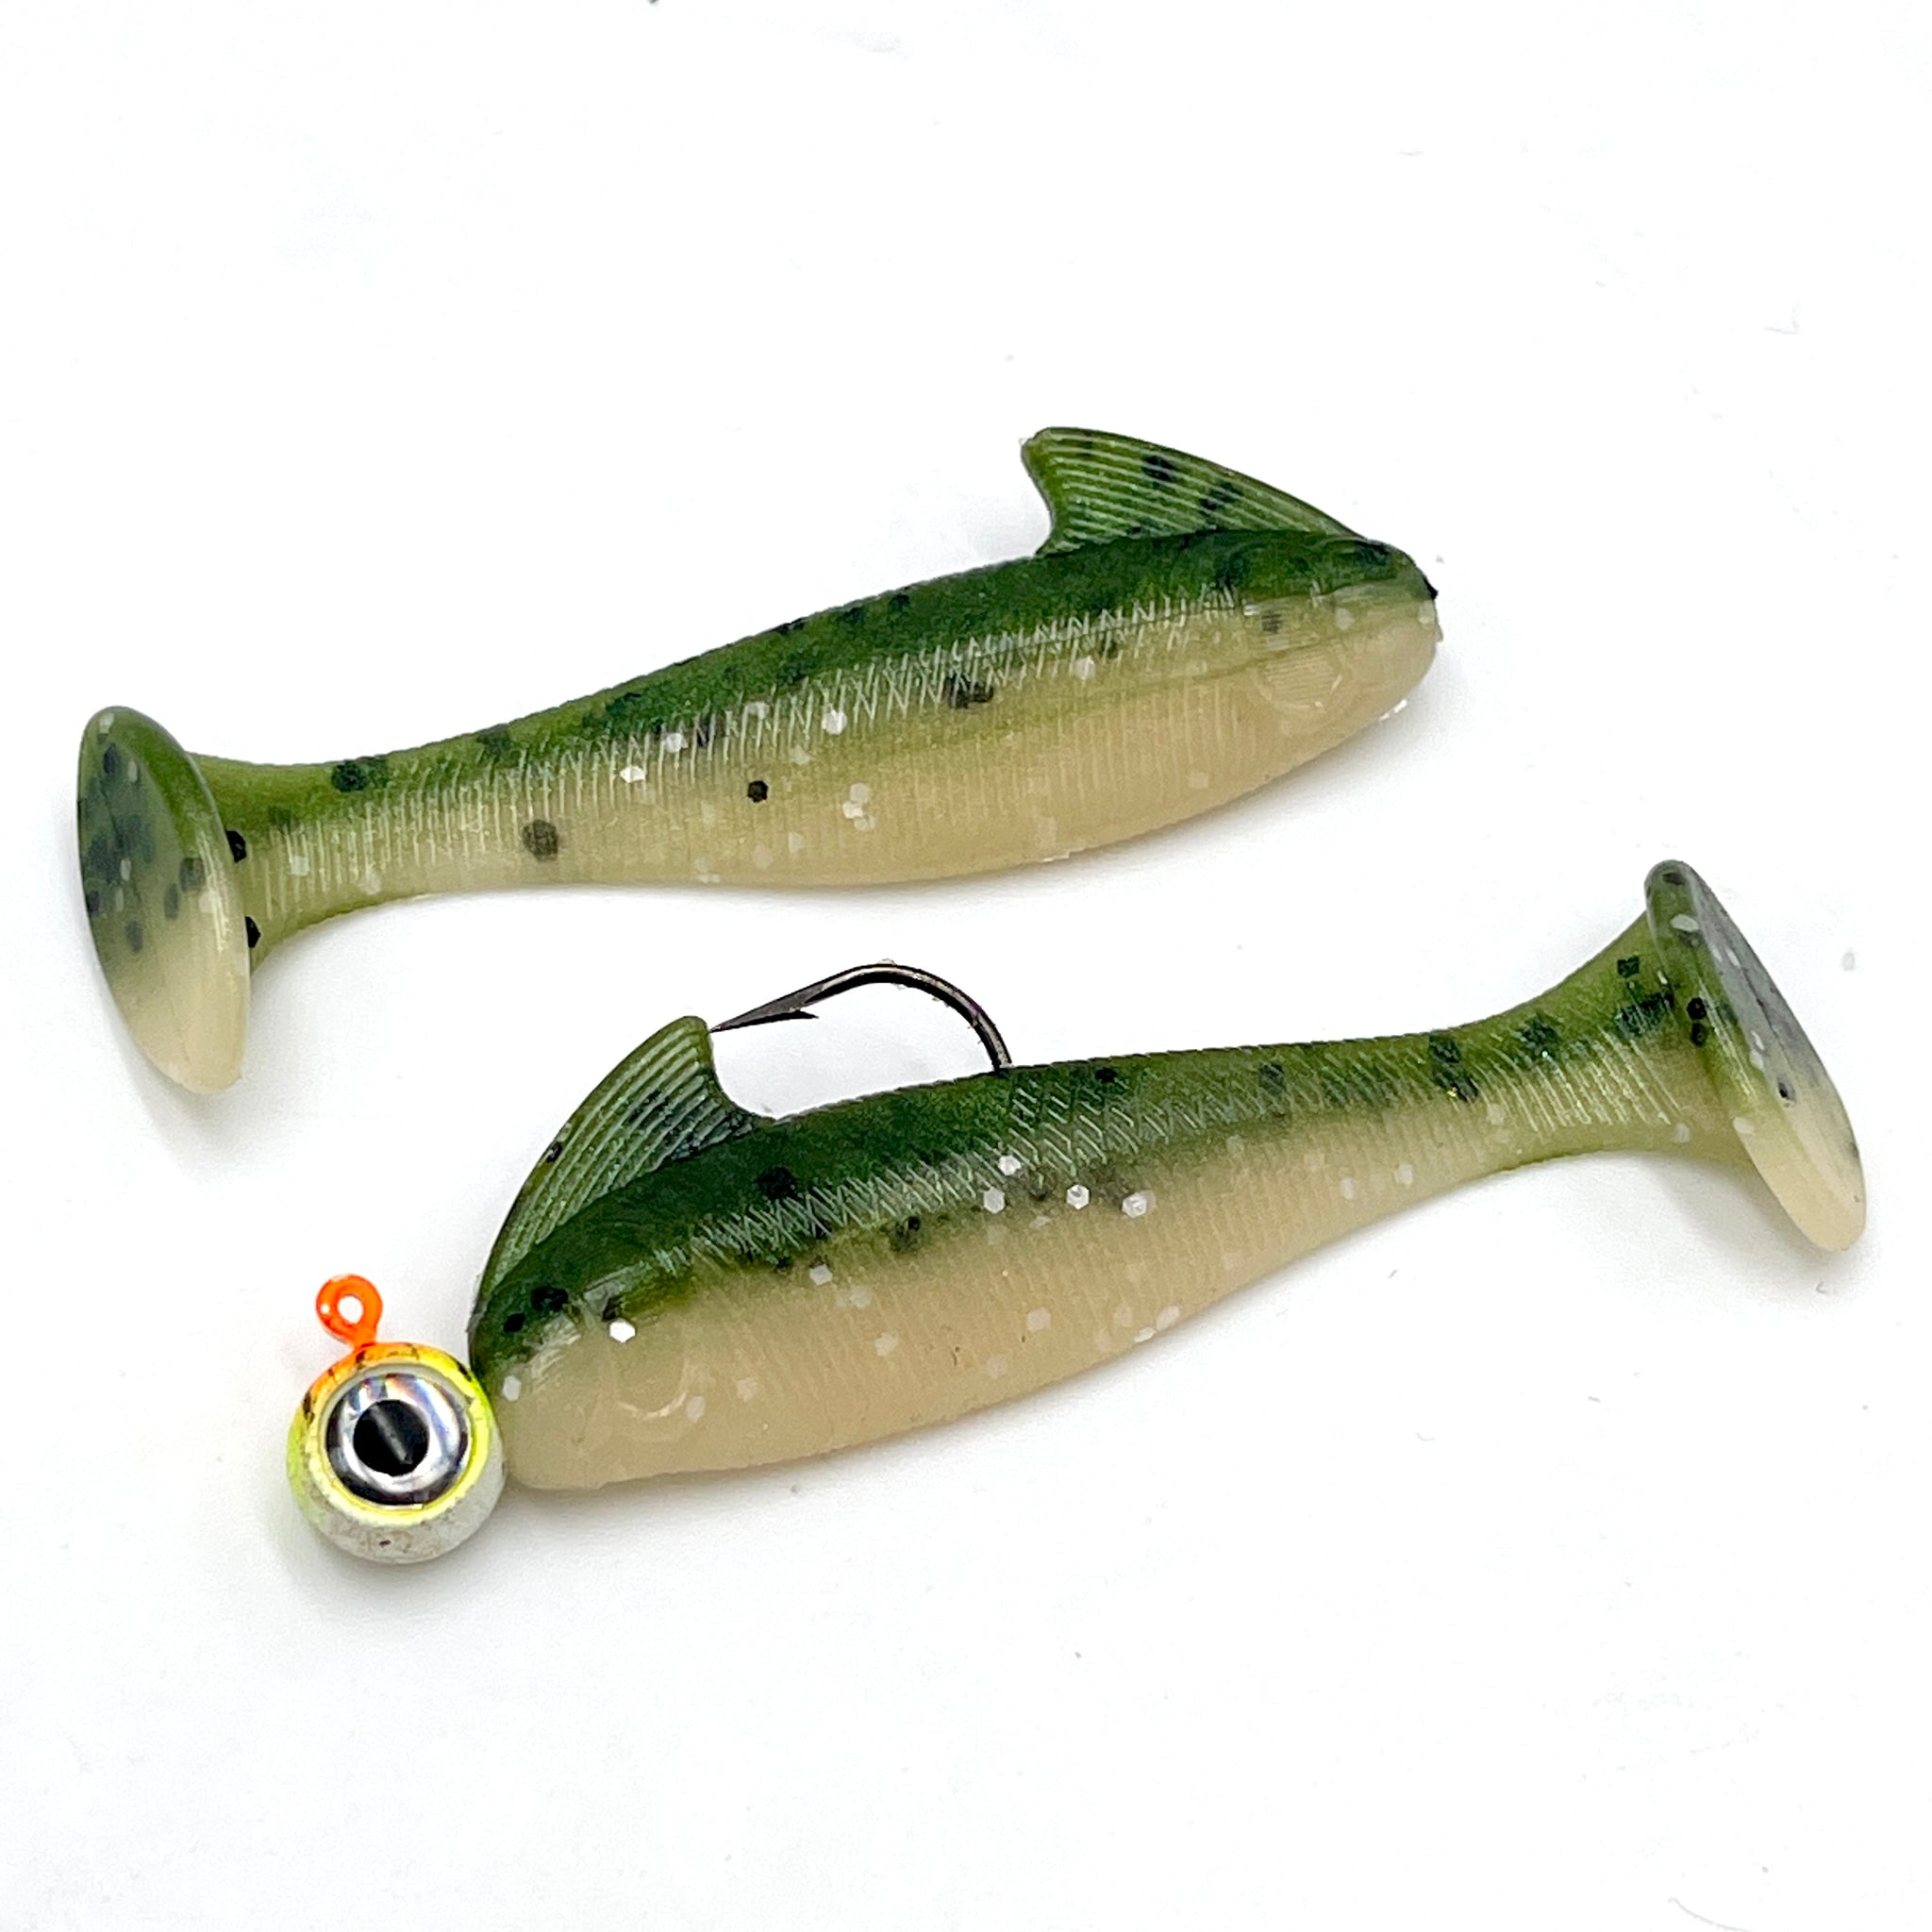 Fishing soft bait mold RingFry 5 inch model ID W317 - Artificial Stone  Fishing Injection Molds, Durable Soft Fishing Lures